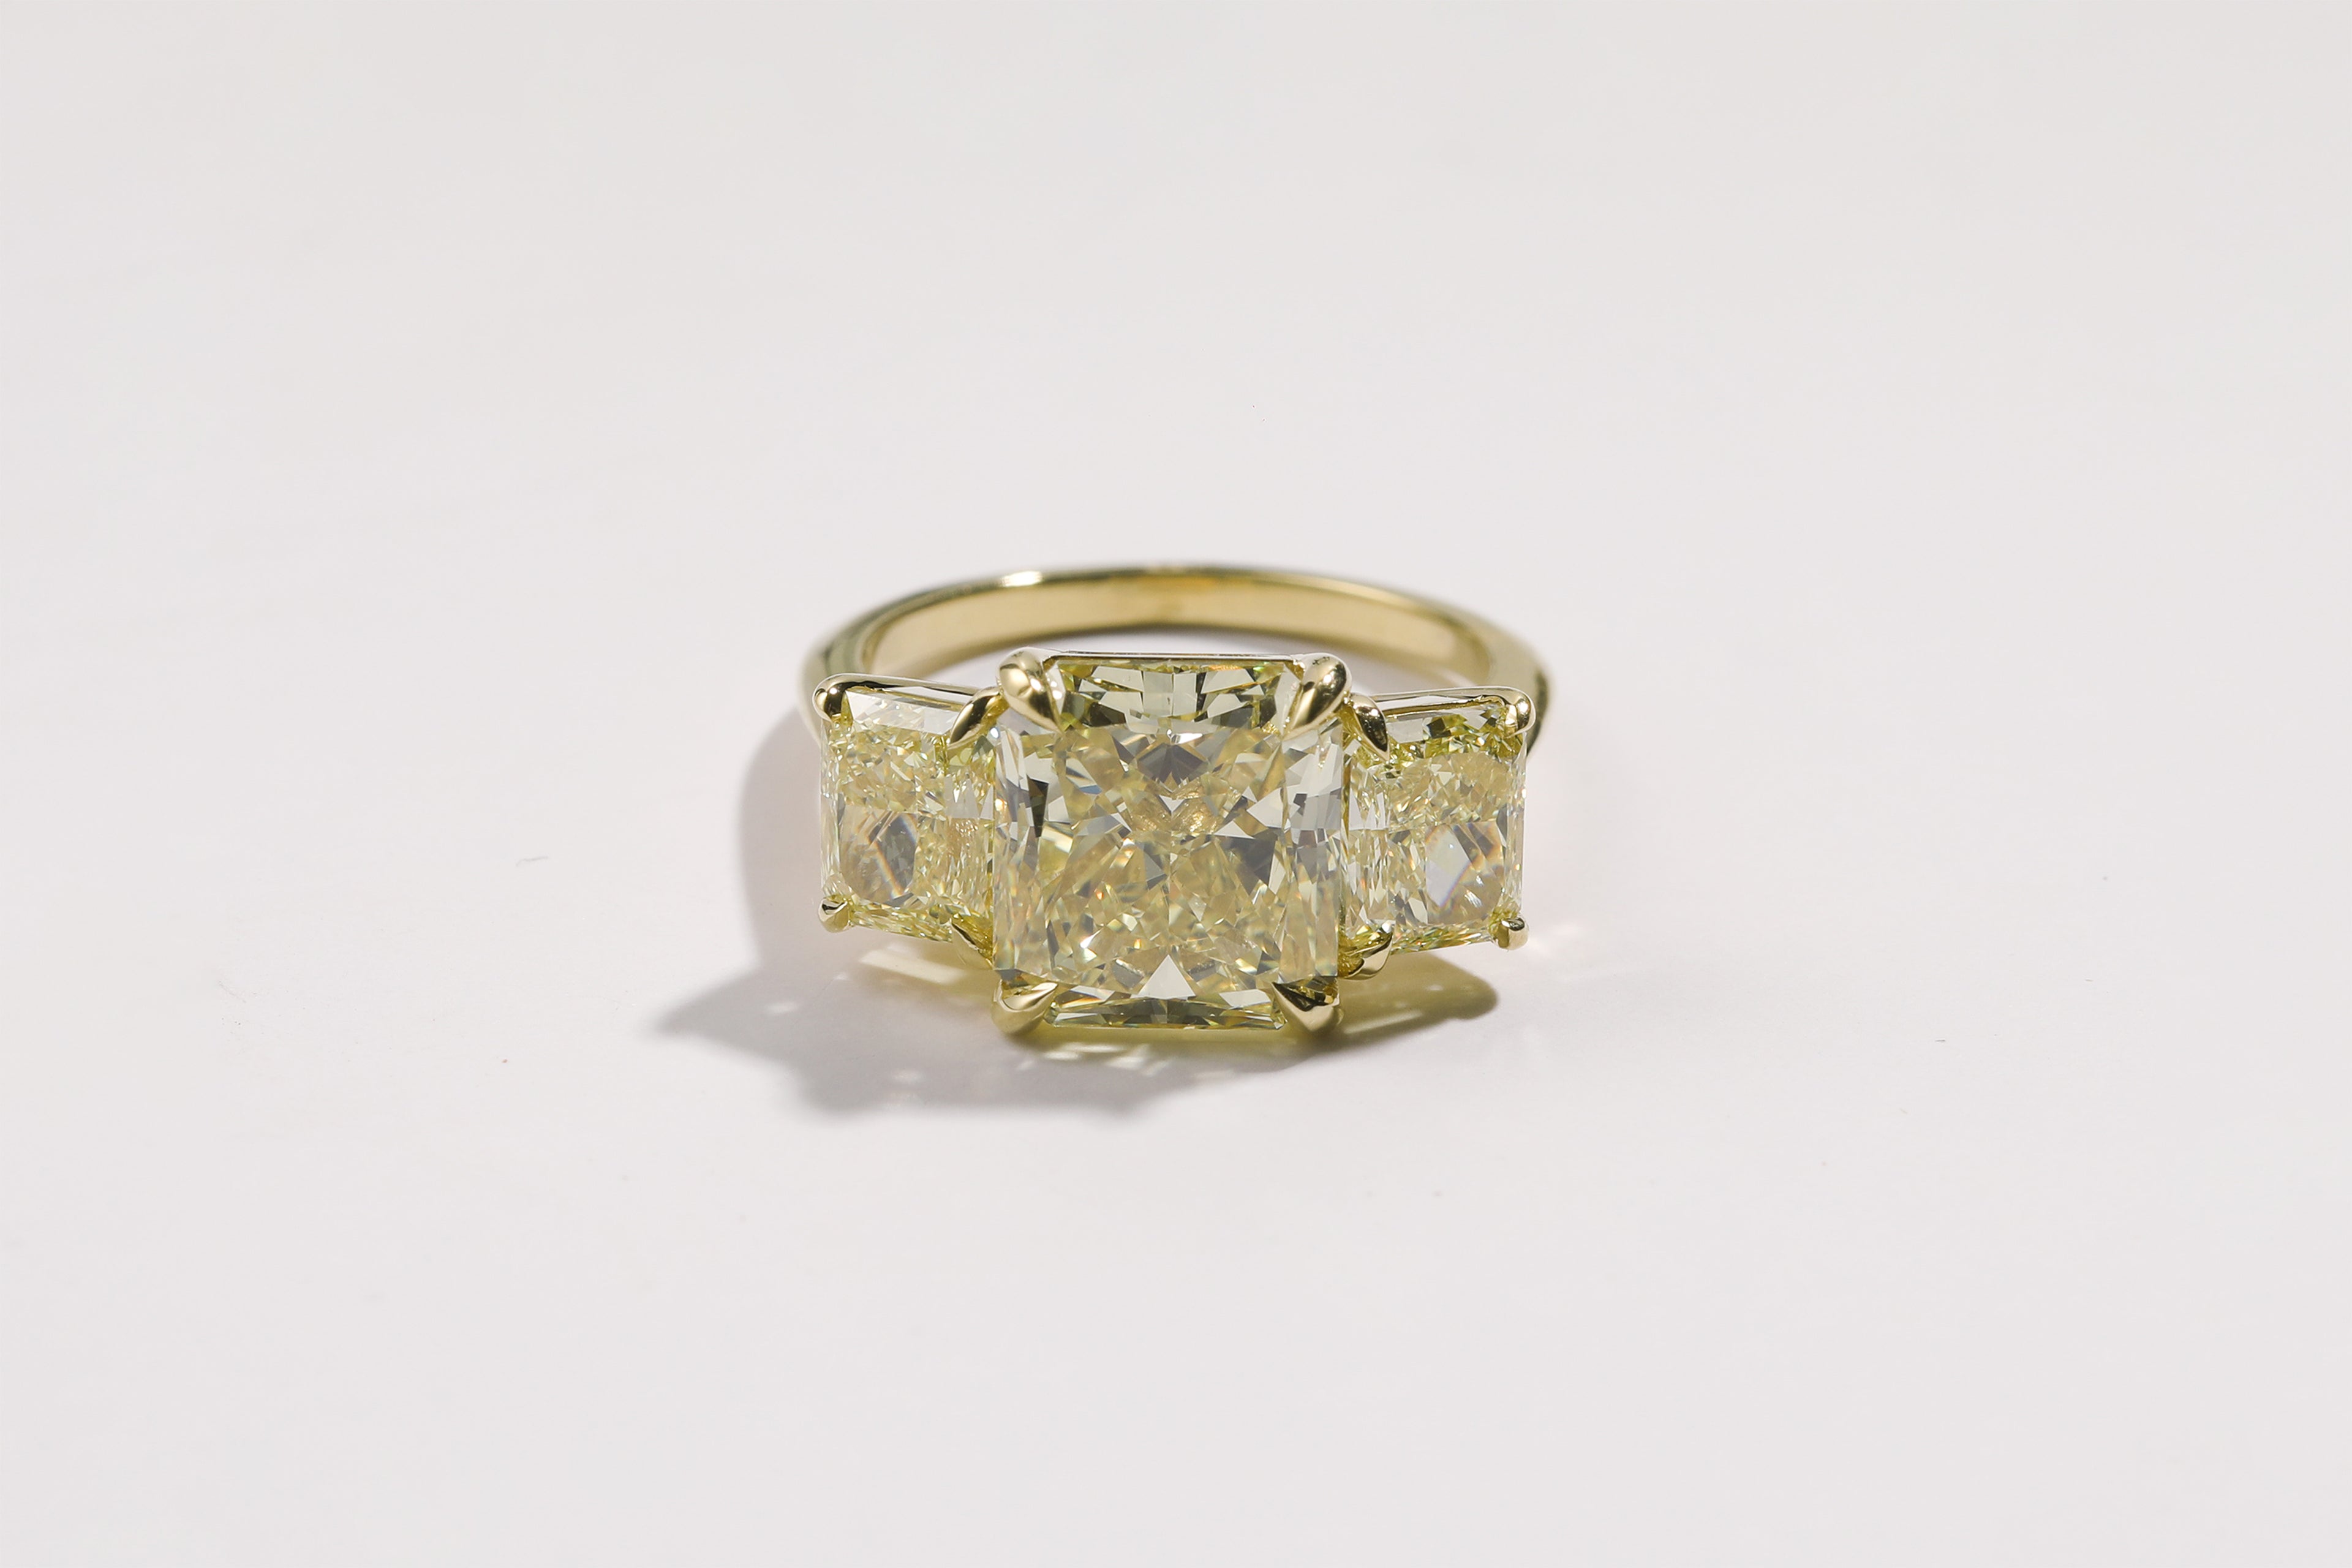 A custom ILA SODHANI Canary Diamond Trap Ring with hand selected natural canary radiant diamonds set in yellow gold.